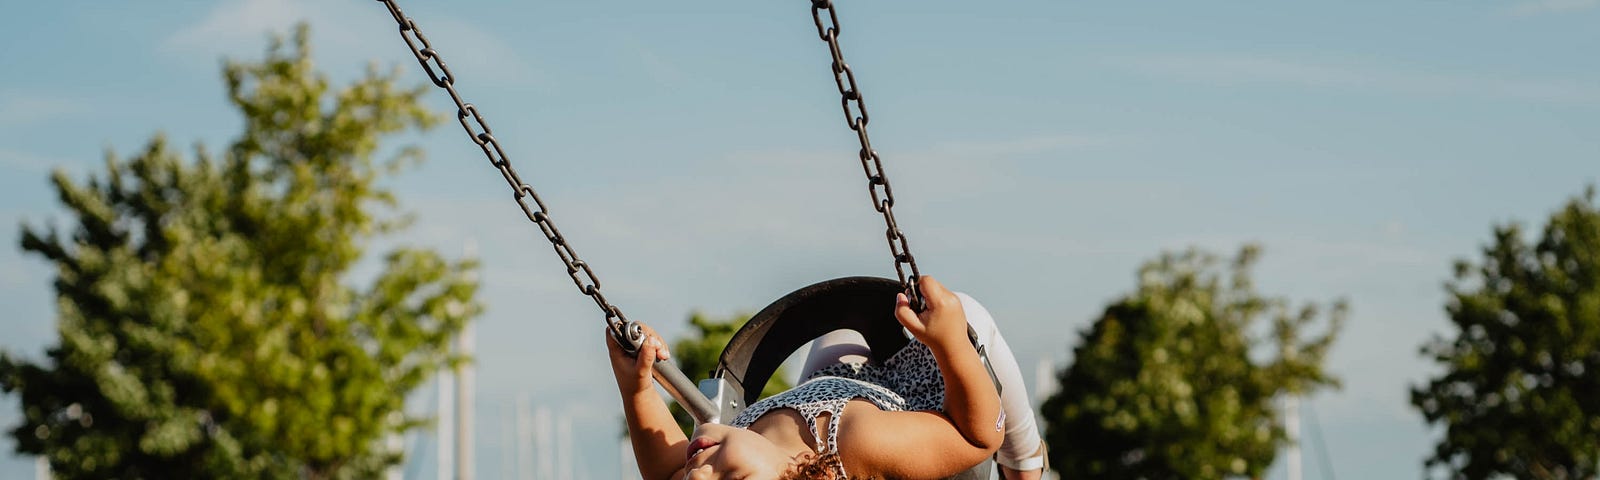 This photo shows a child on a swing.